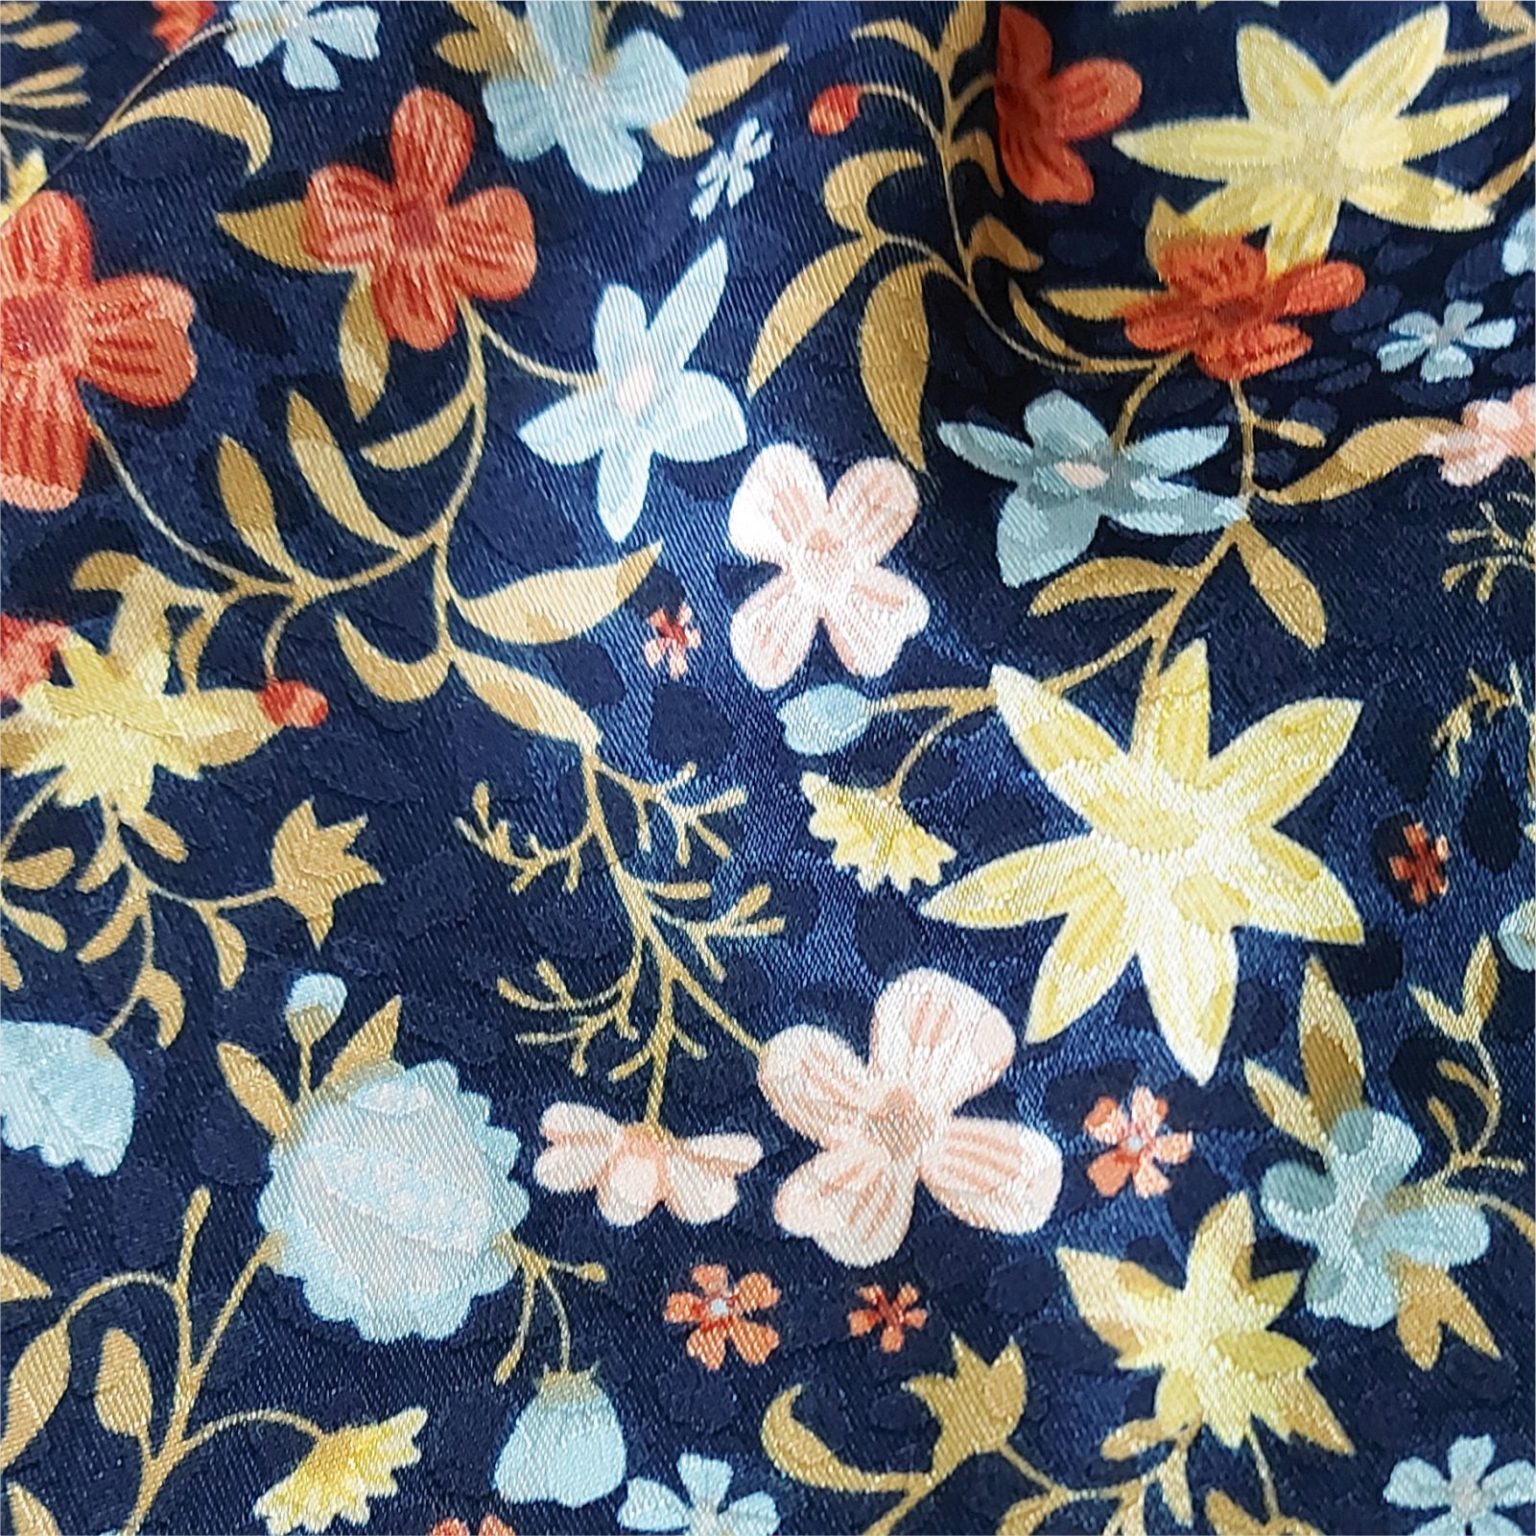 Satin Jacquard Flowers on Blue Dressmaking Fabric at More Sewing